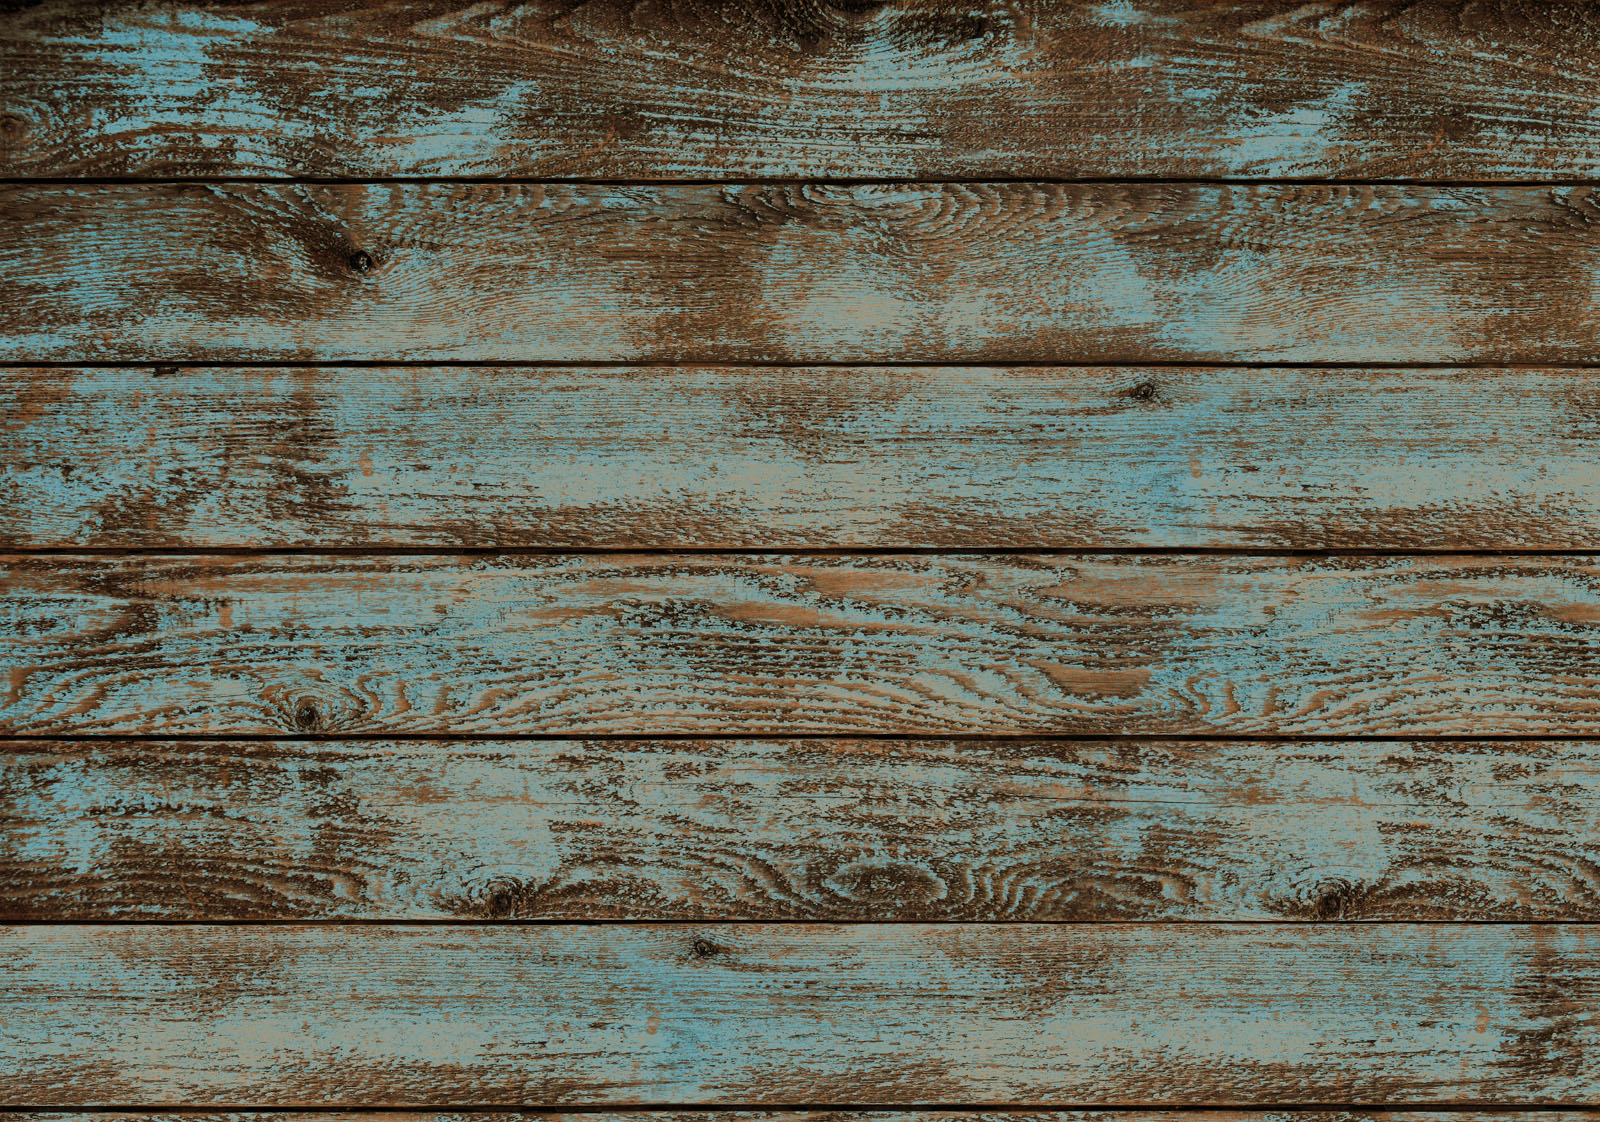 Rustic Wood Slides PPT Backgrounds for Powerpoint Templates.